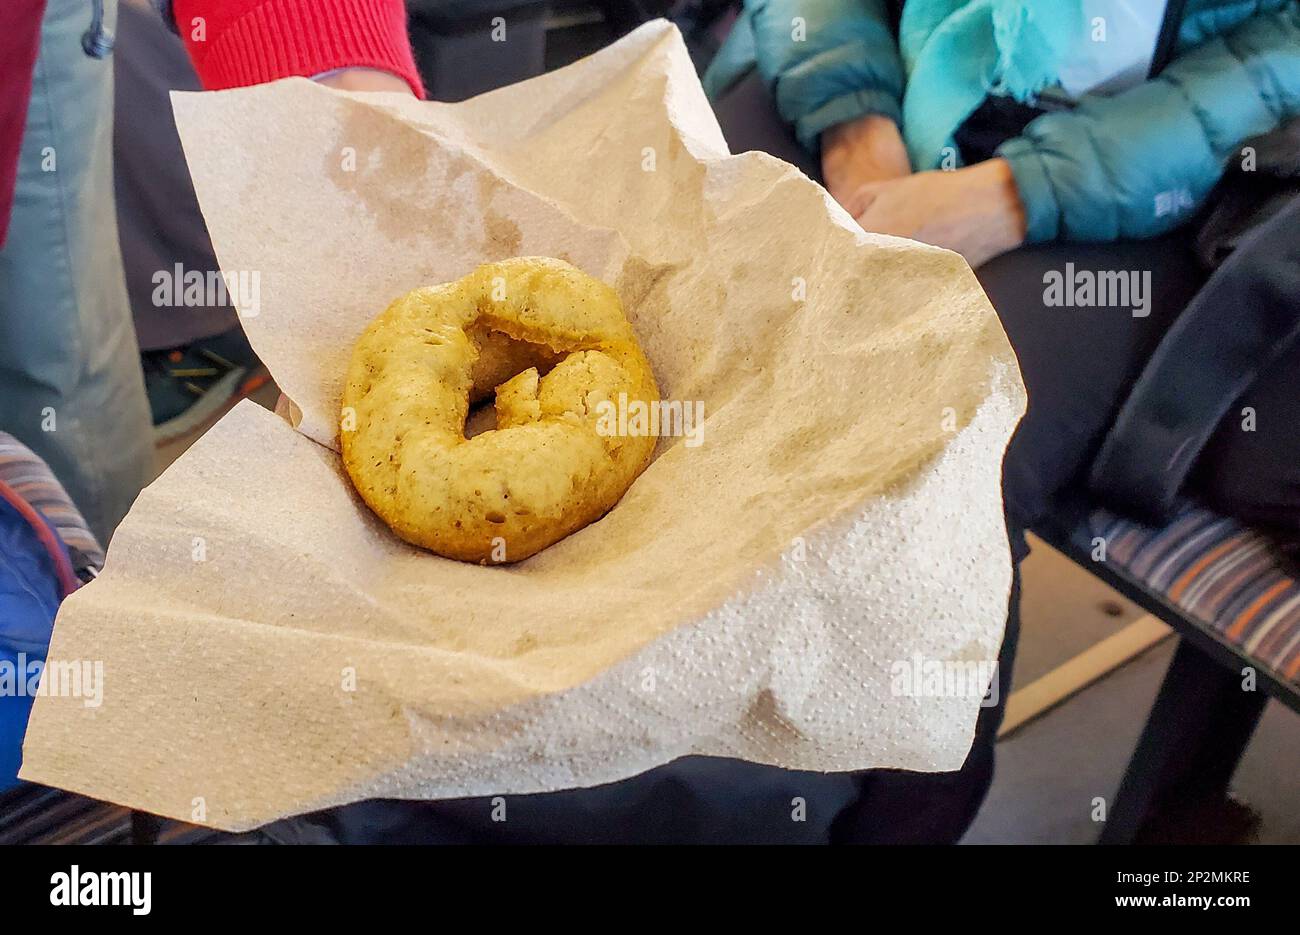 Famous (and tasty) doughnut made at the visitor's center atop Pikes Peak at 14,115 feet, using a recipe modified for high elevation. Stock Photo